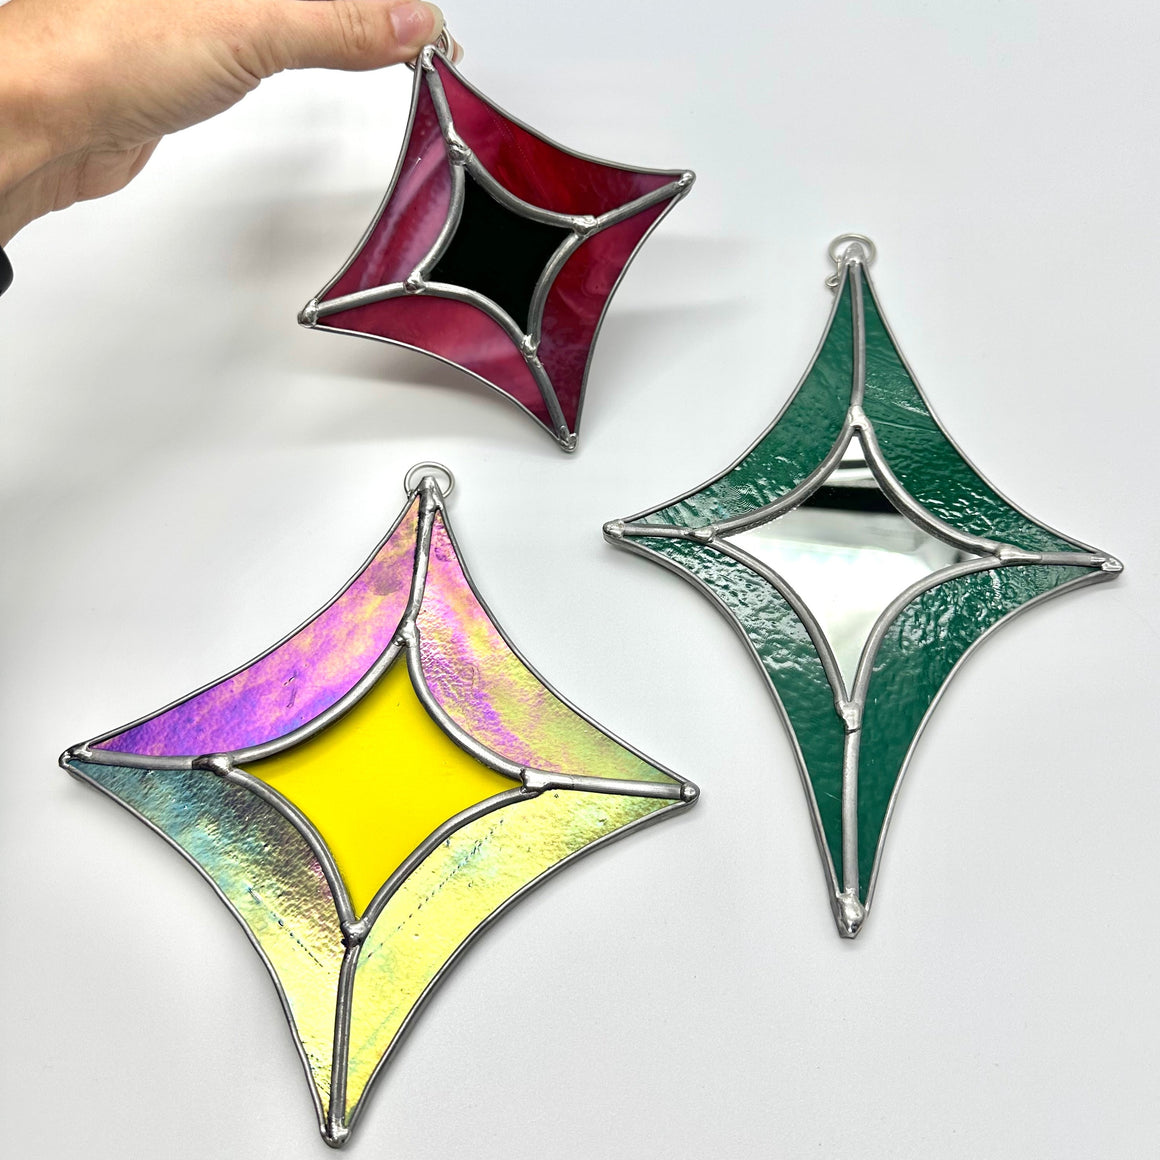 Intro to Stained Glass Workshop with Kara O'Dea - Sparkle Edition - Columbus - March 26